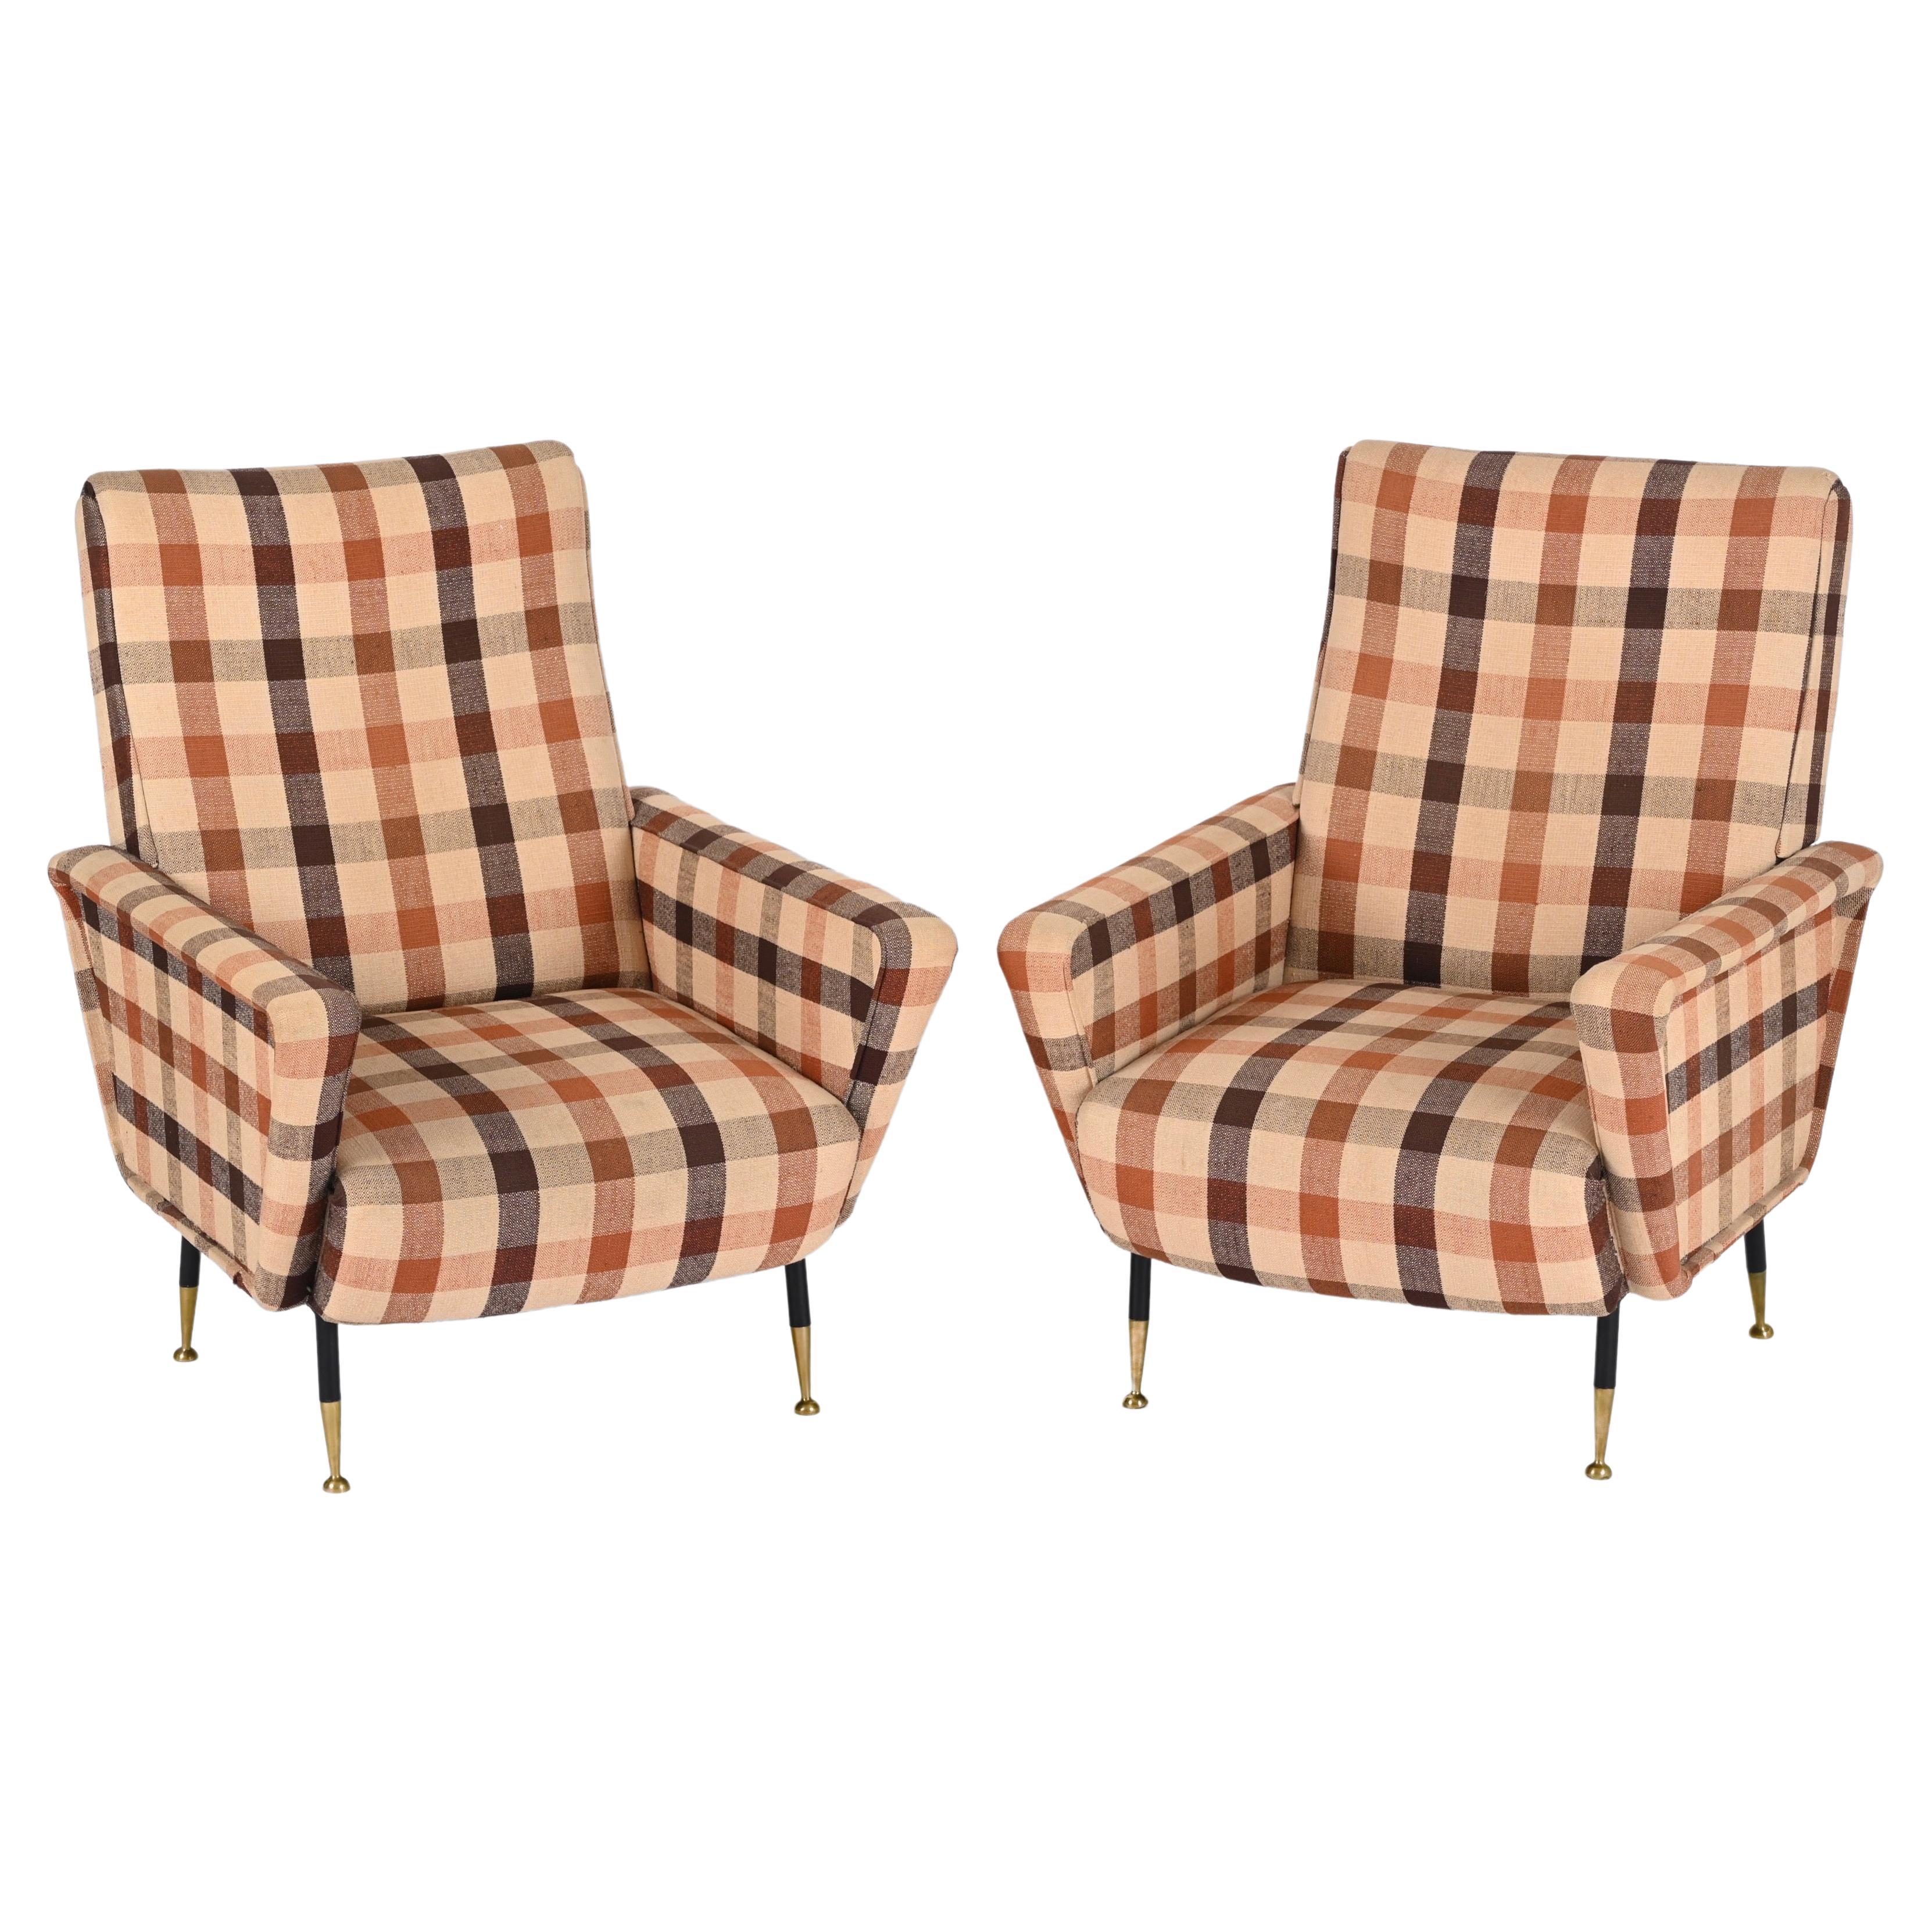 Marco Zanuso Pair of Armchairs, Check Fabric, Brass and Metal, Italy 1950s